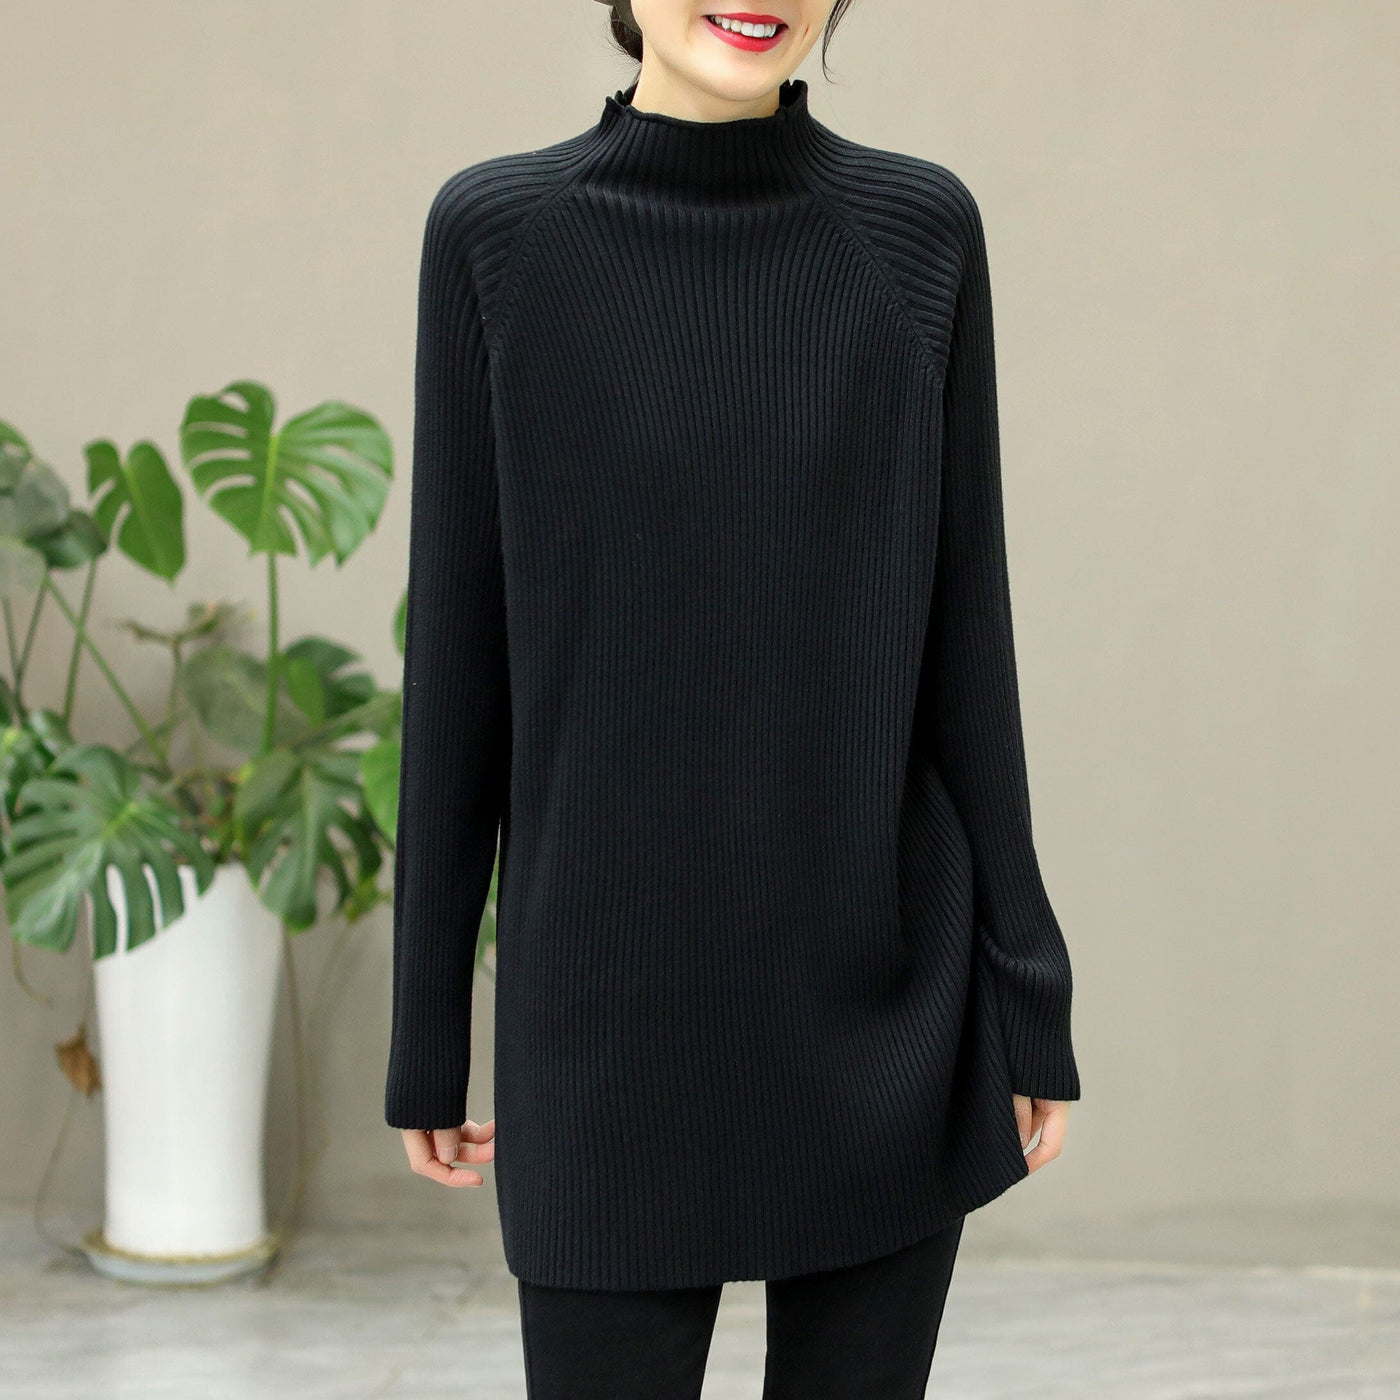 Winter Knitted Solid Stripe Turtleneck Elastic Long Sweater Dec 2022 New Arrival One Size Black 